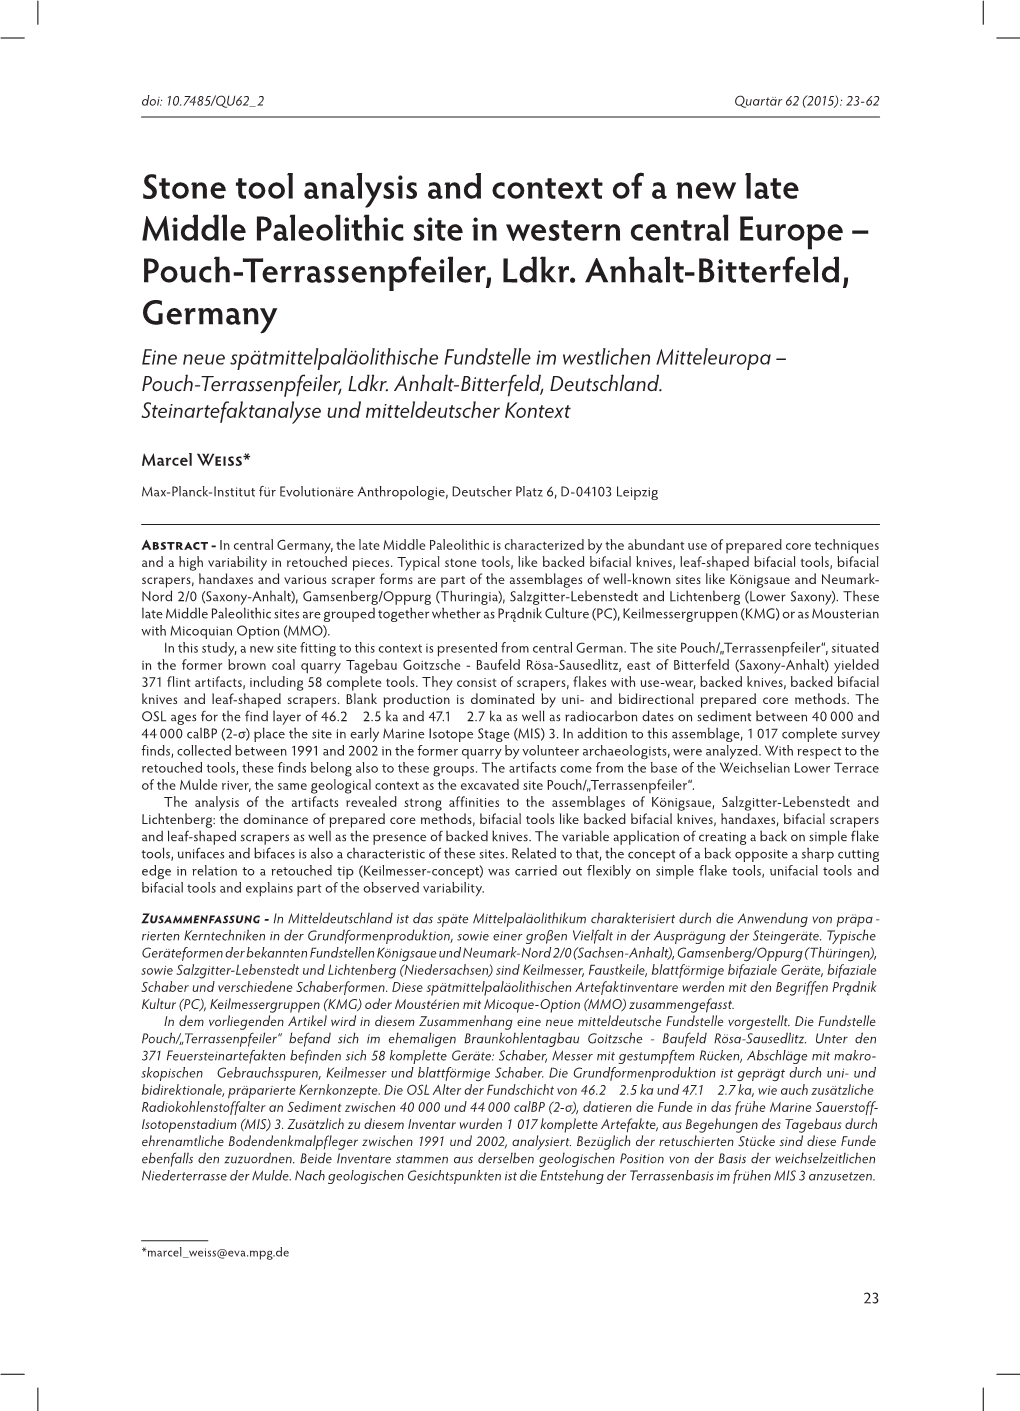 Stone Tool Analysis and Context of a New Late Middle Paleolithic Site in Western Central Europe – Pouch-Terrassenpfeiler, Ldkr